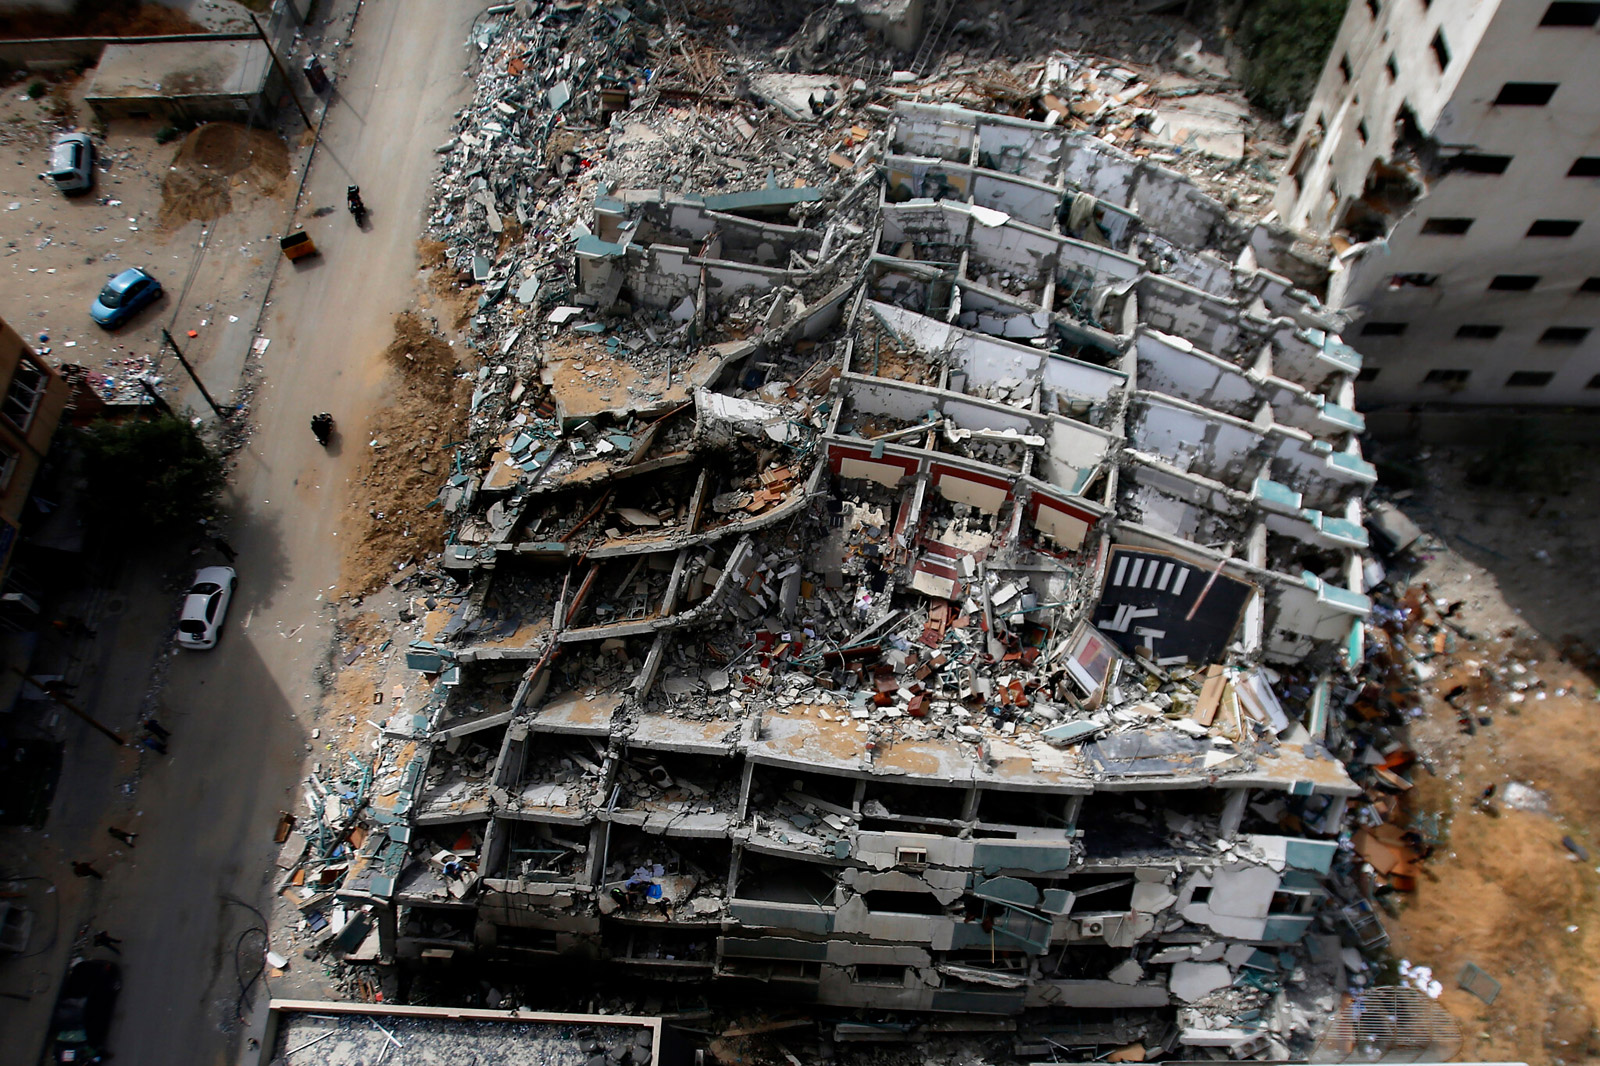 A May 2021 photograph of the rubble of Jalaa Tower in Gaza after it was bombed by Israel. In addition to residential apartments, the building housed the offices of Associated Press, Al Jazeera, and other media organizations.